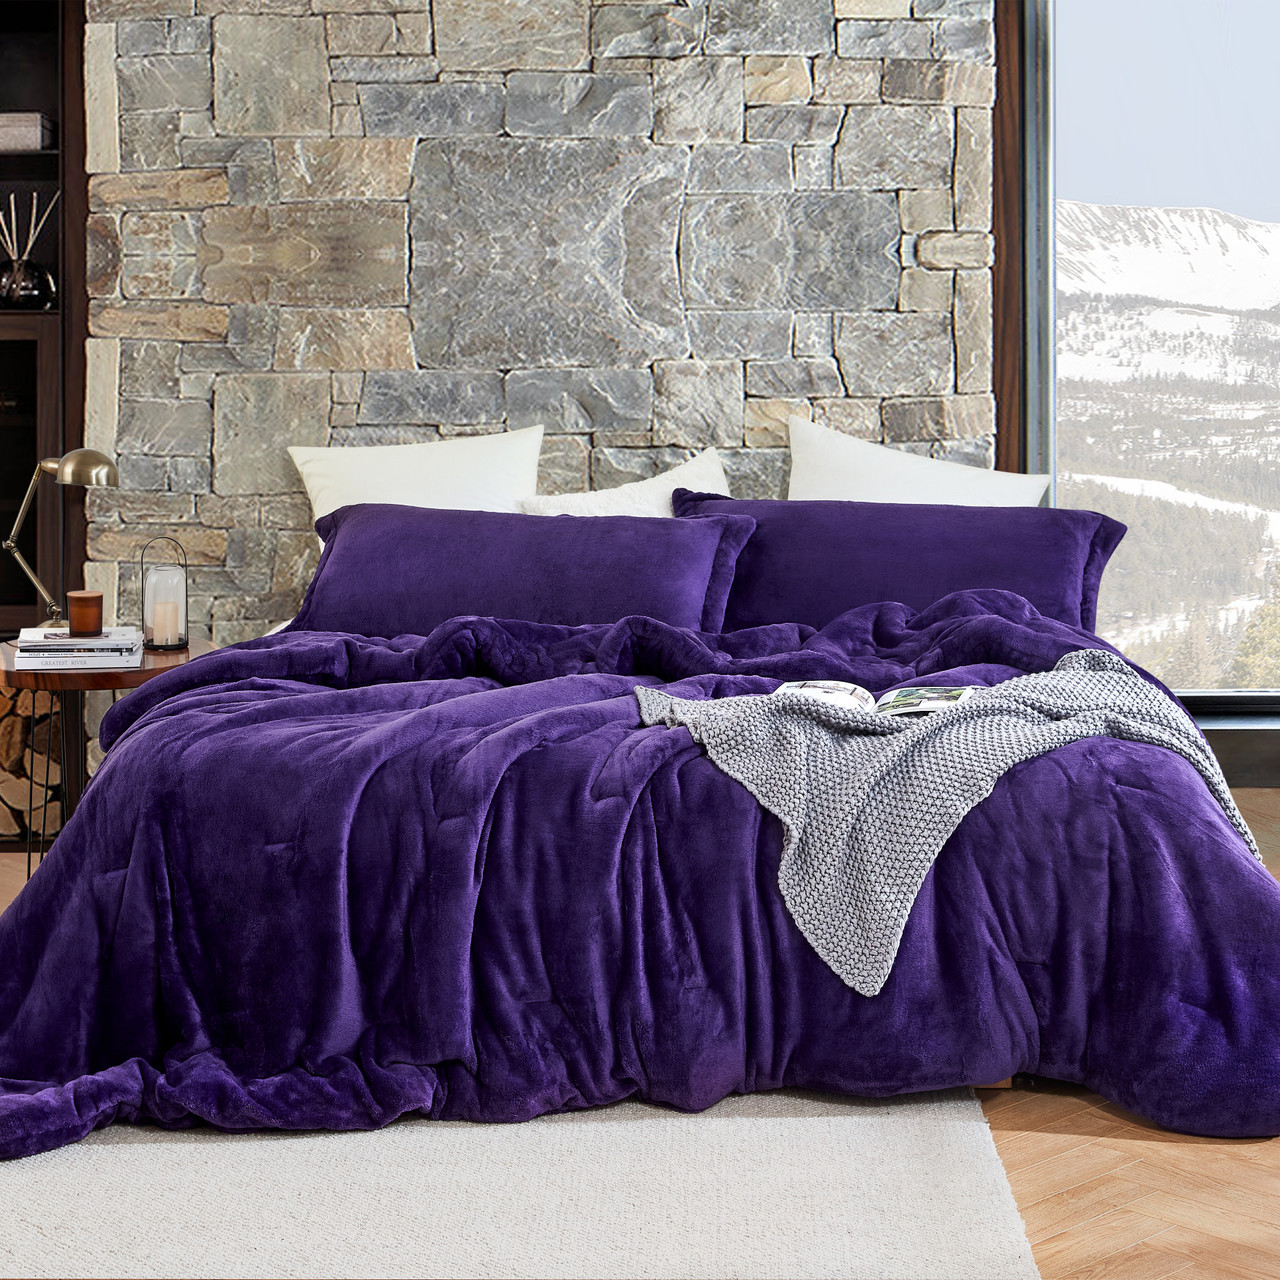 Coma Inducer® Oversized King Comforter - Me Sooo Comfy - Purple Reign